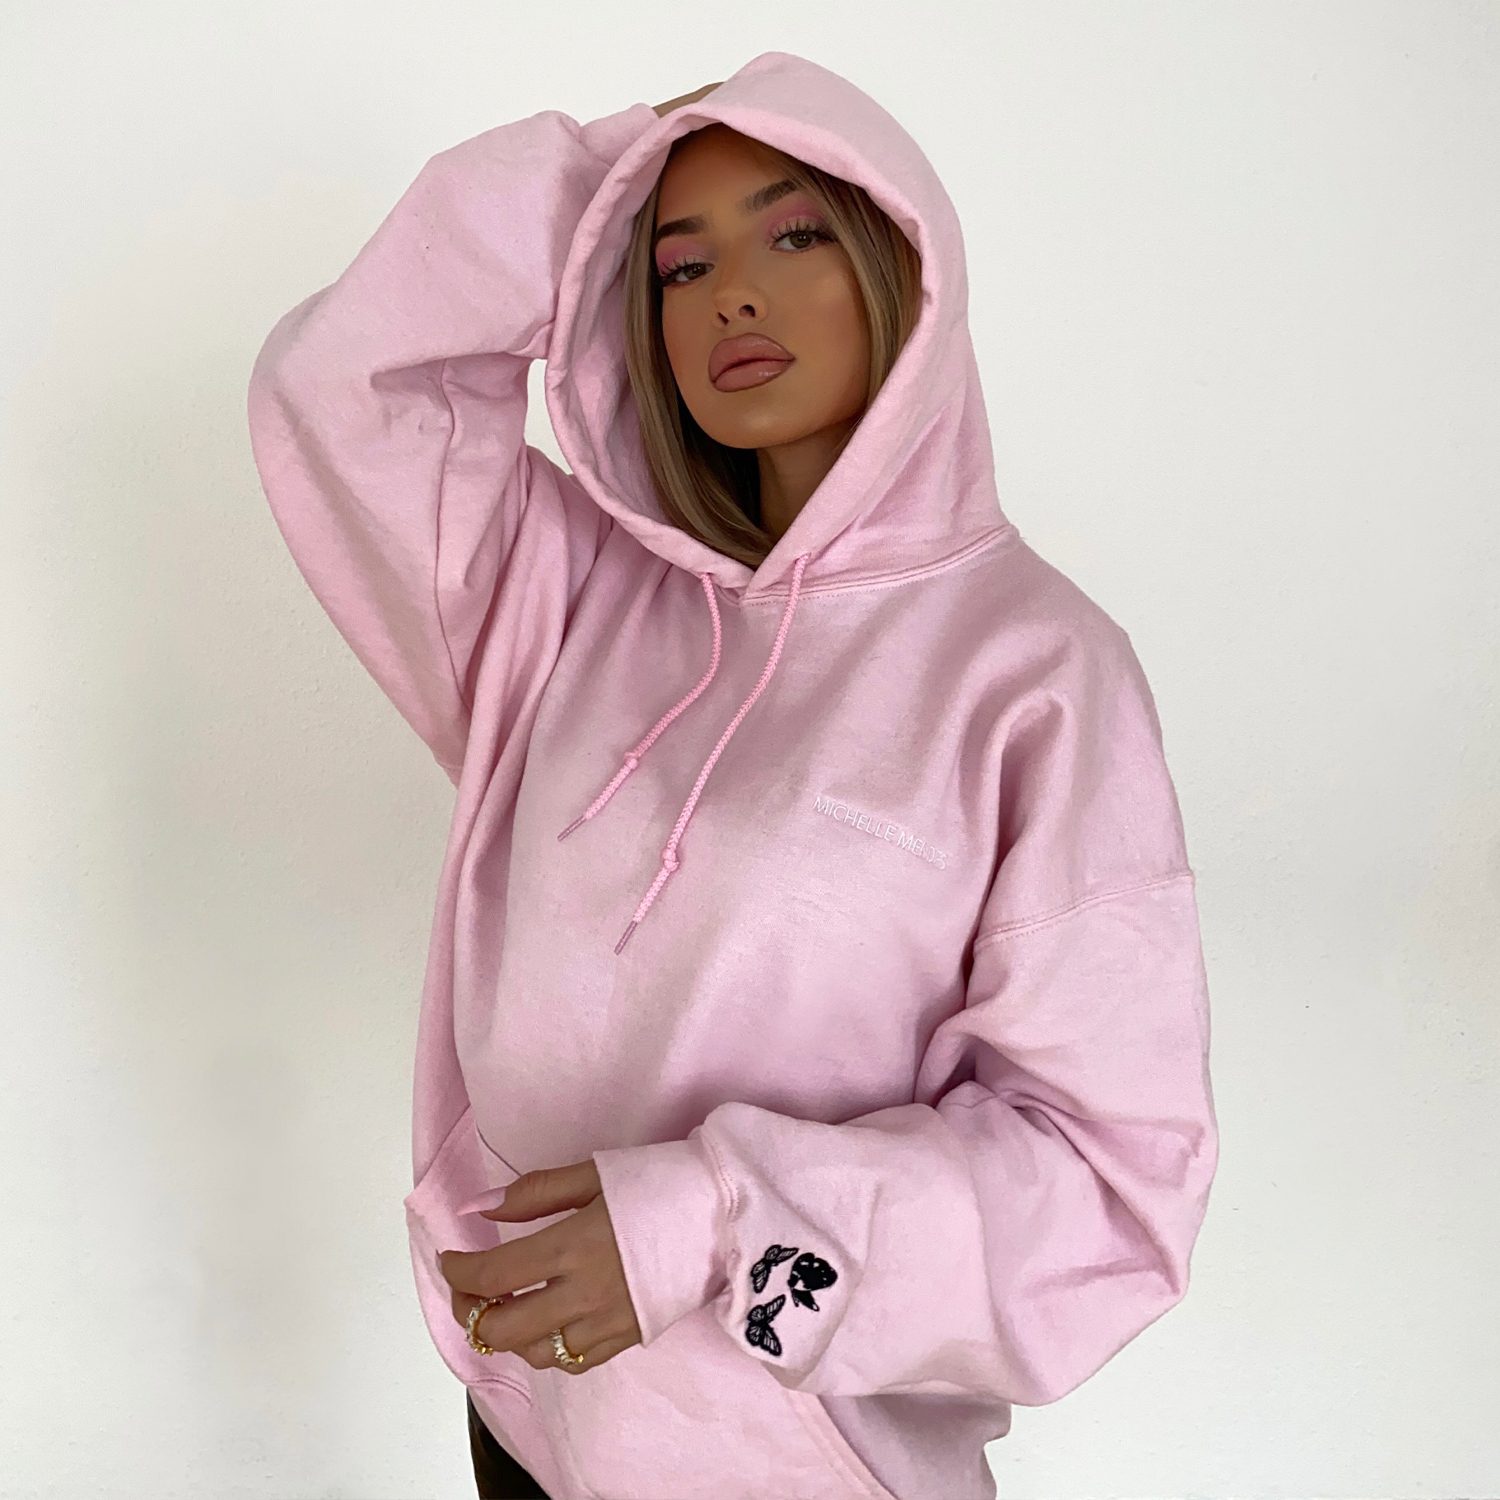 Hoodie Schmetterling Rosa | Hoodies | Textiles | Merch and Fashion